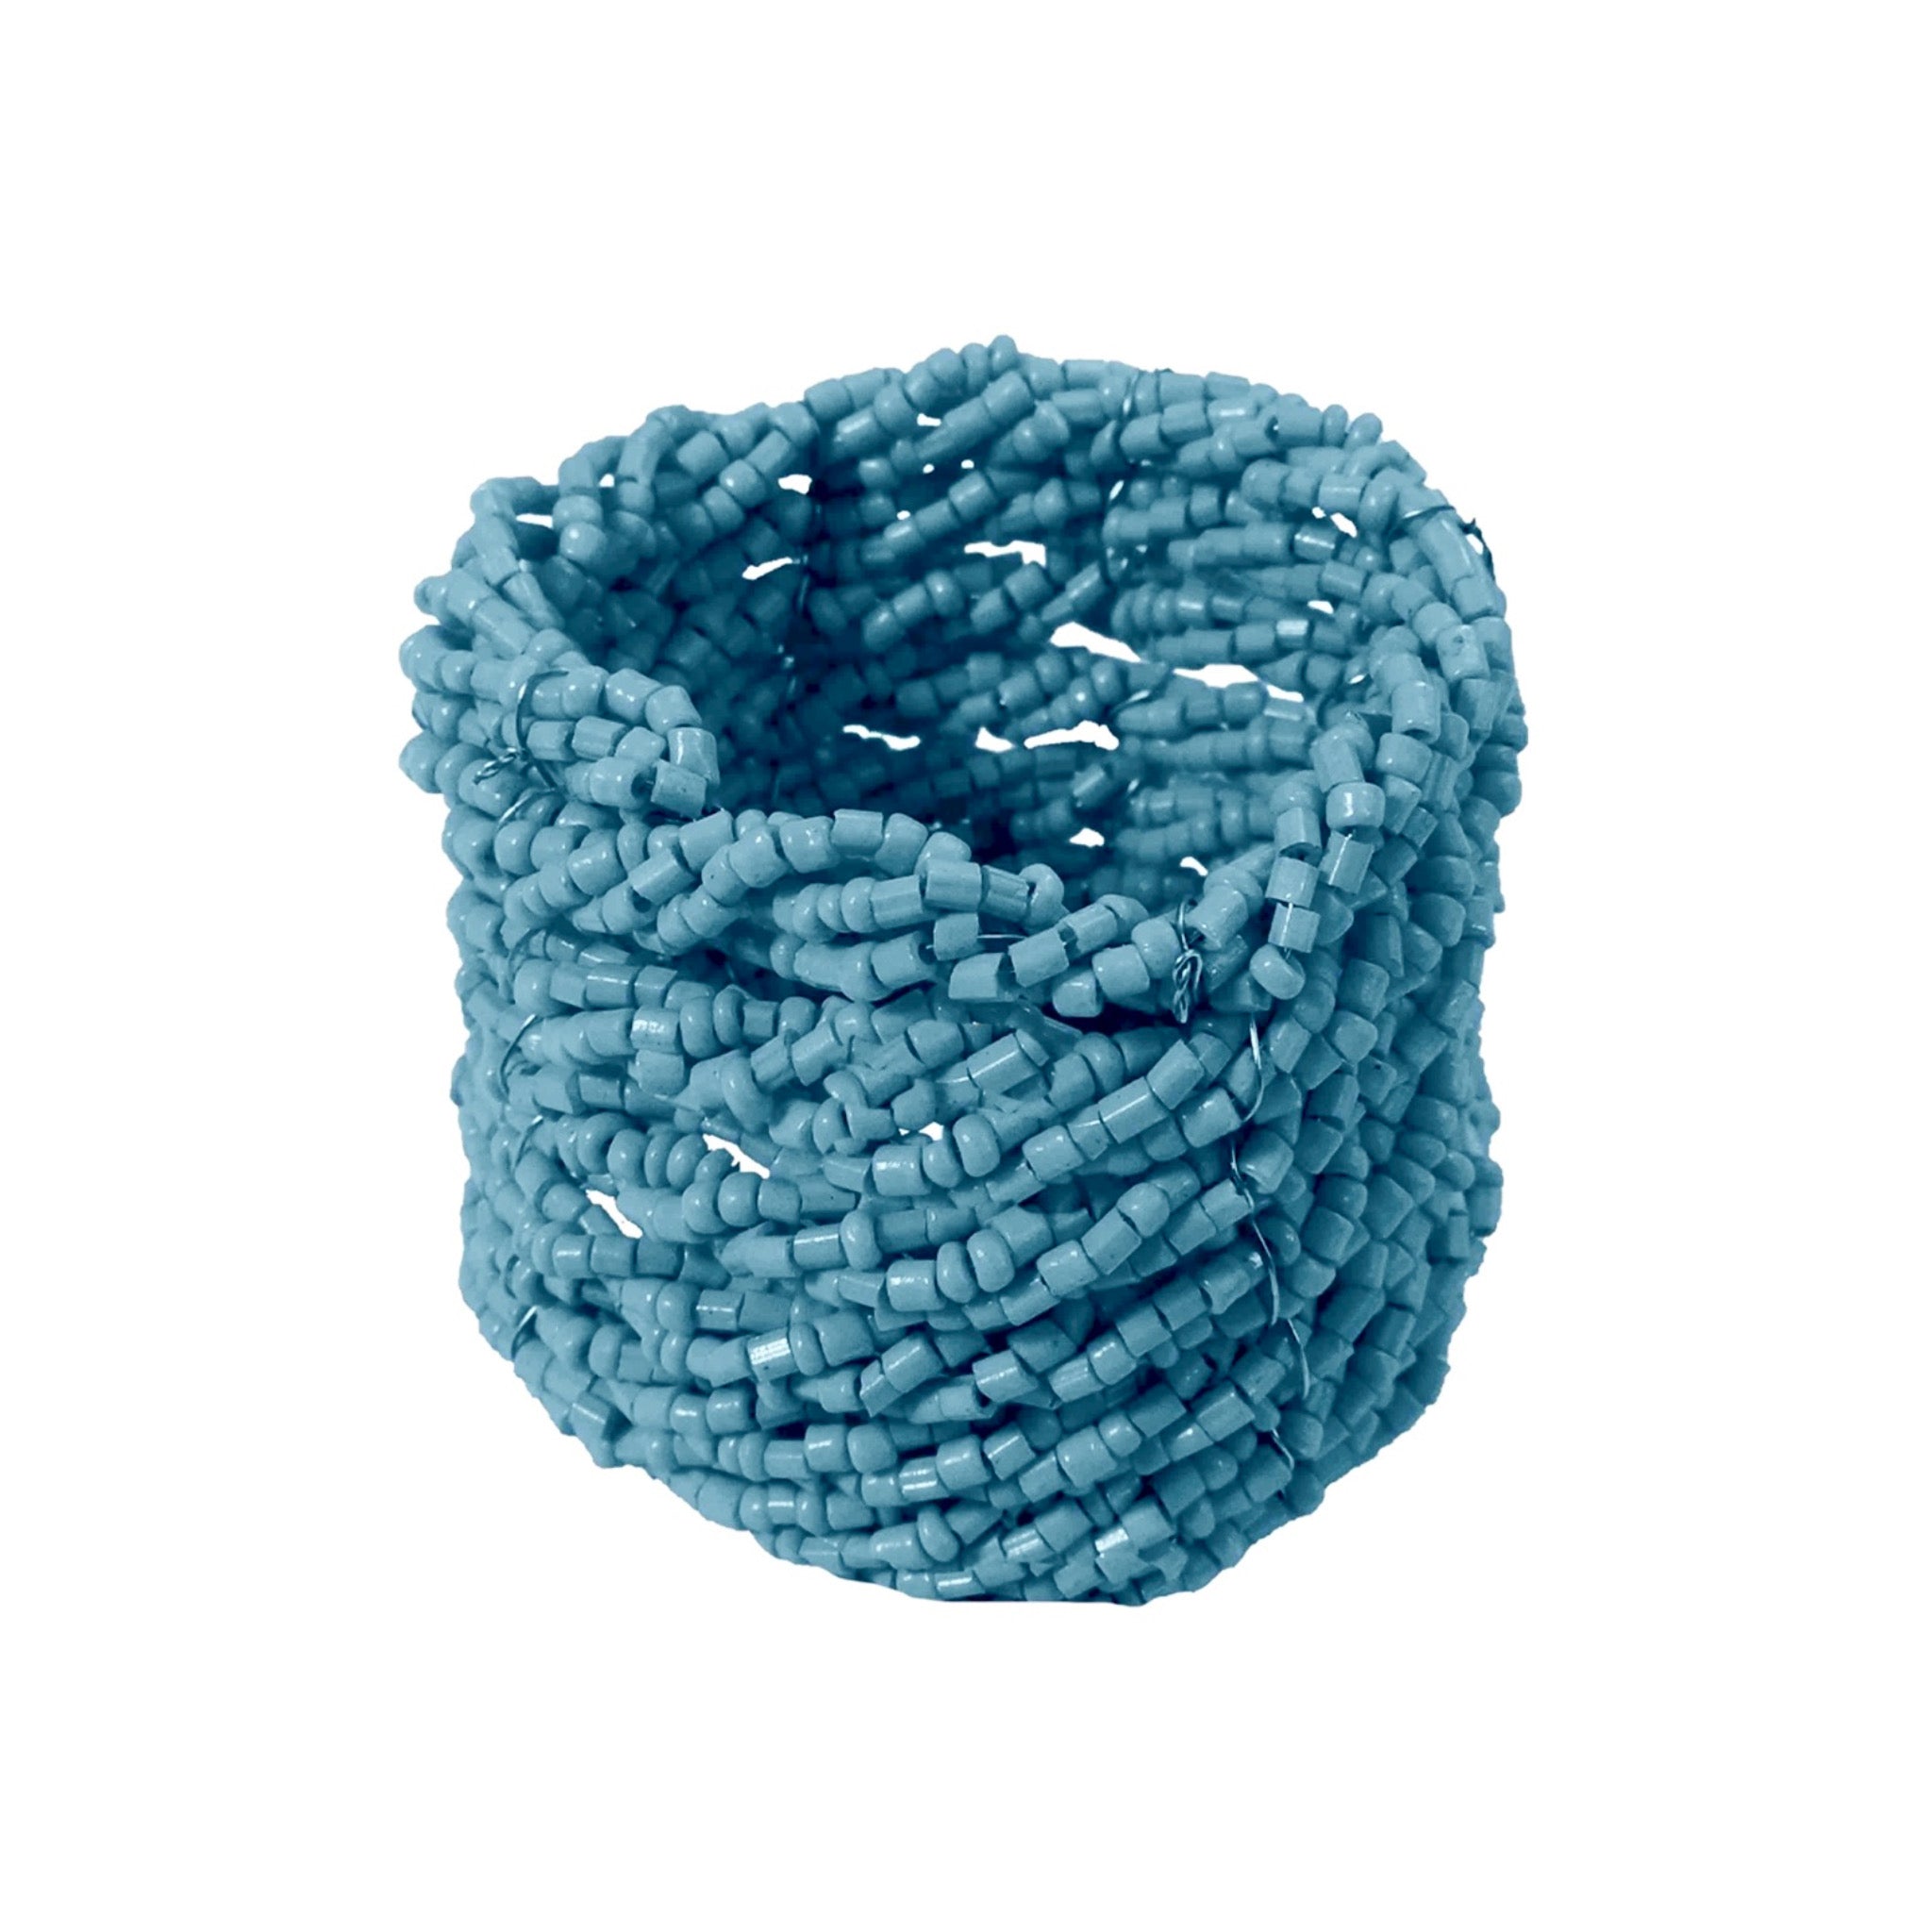 Jute Coil Napkin Ring in Teal, Set of 4